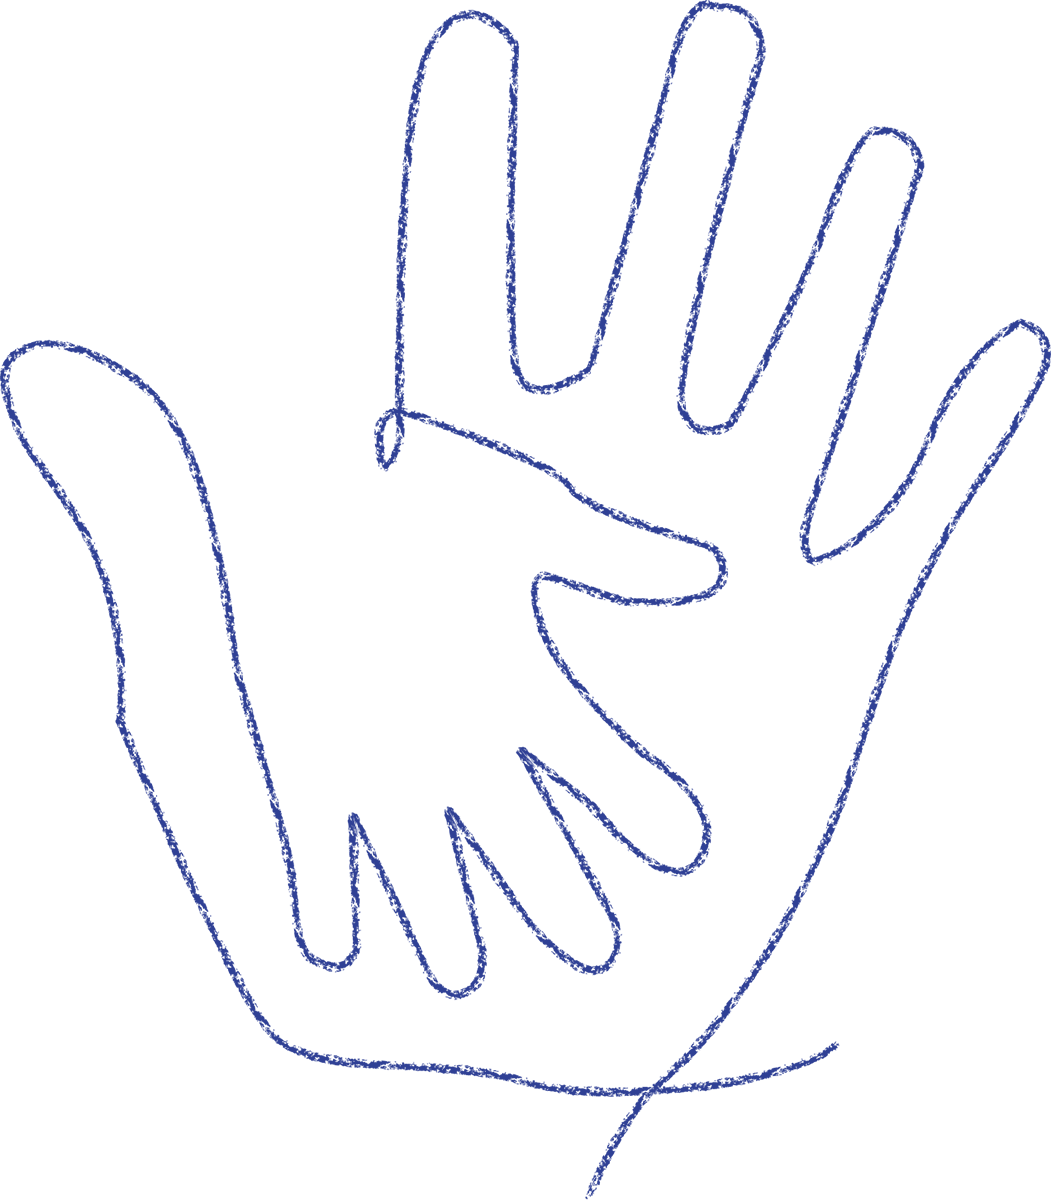 illustration of a child’s hand touching a mother’s hand